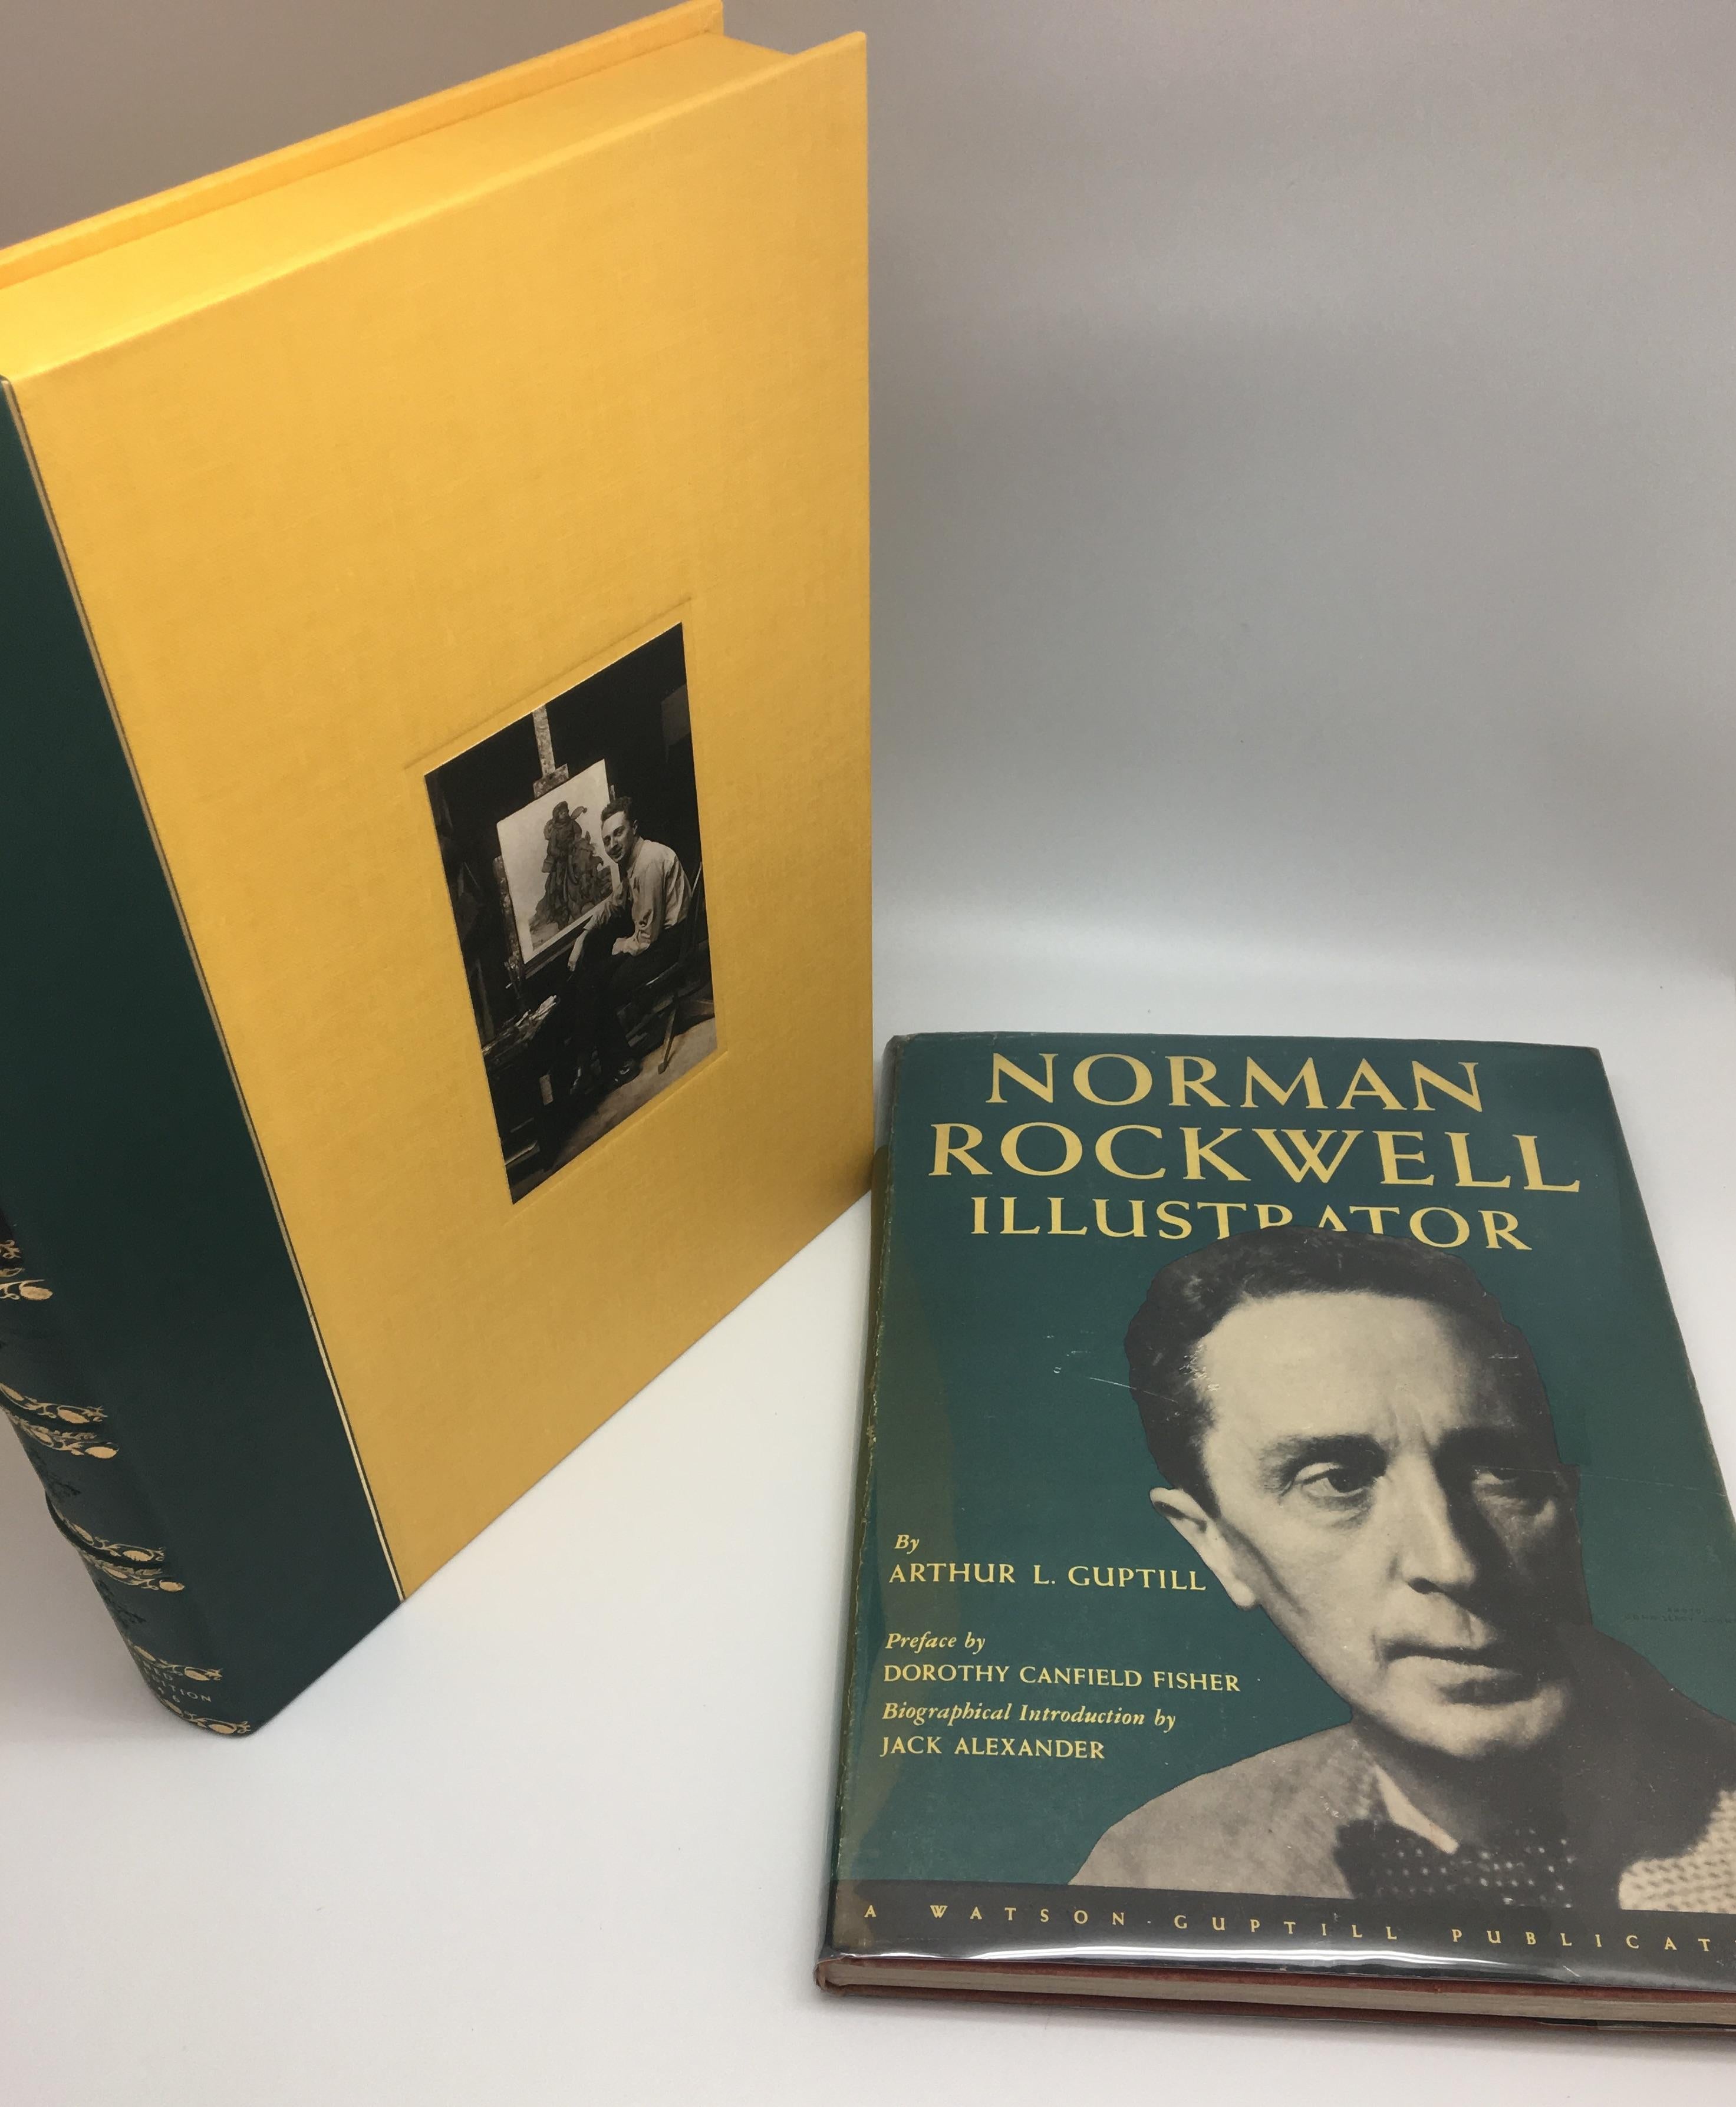 Guptill, Arthur. Norman Rockwell: Illustrator. New York: Watson-Guptill Publications, 1946. First edition signed by Rockwell. Original dust jacket and presented in custom clamshell.

This first edition of Arthur Guptill’s Norman Rockwell: